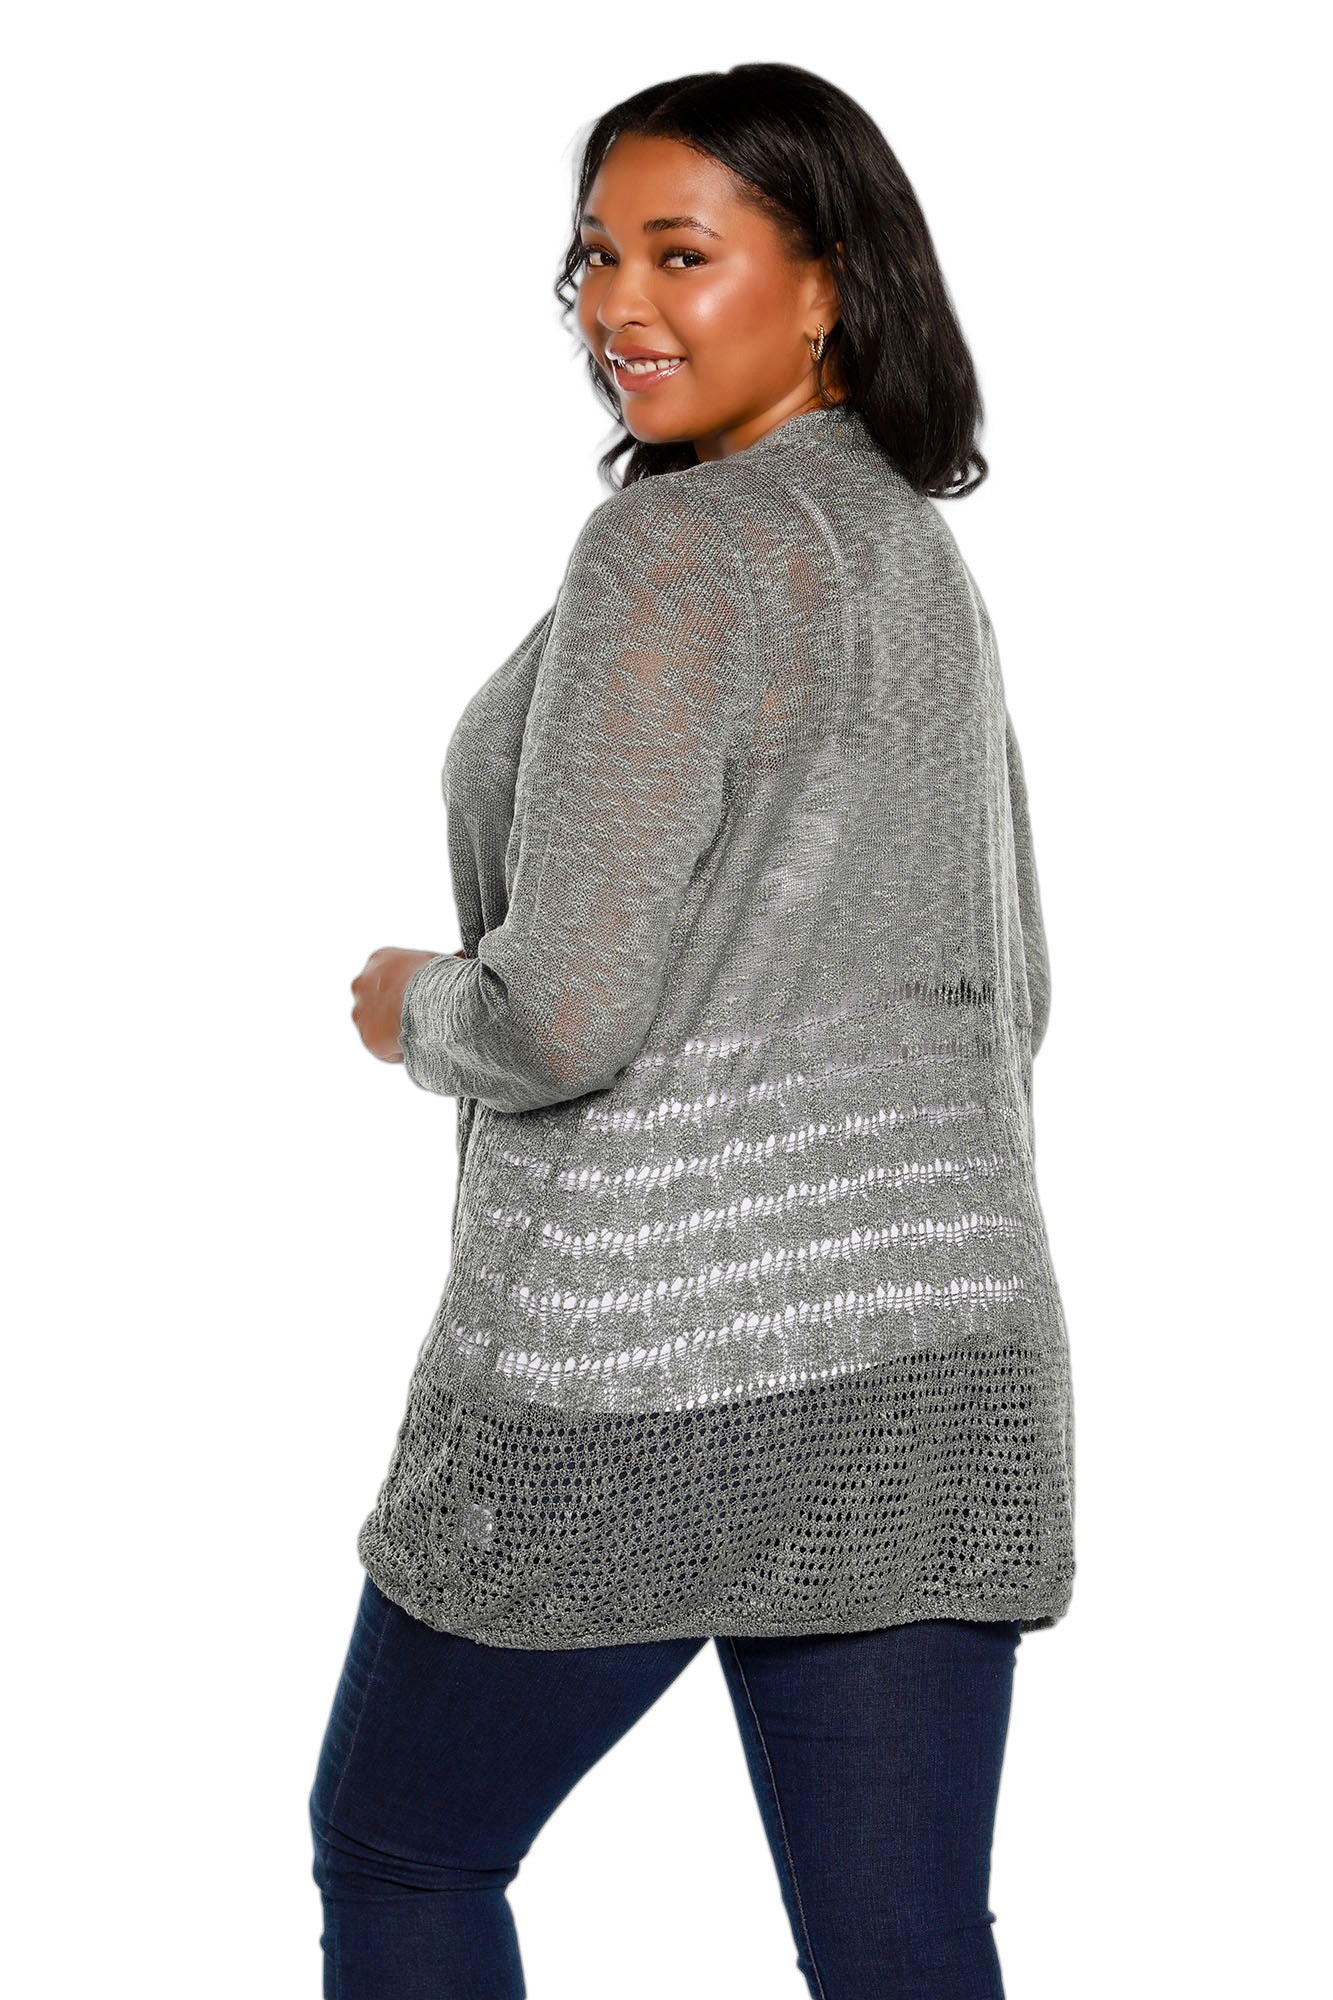 Women's Plus Size Crochet Cardigan with Long Sleeves and an Open Front | Curvy